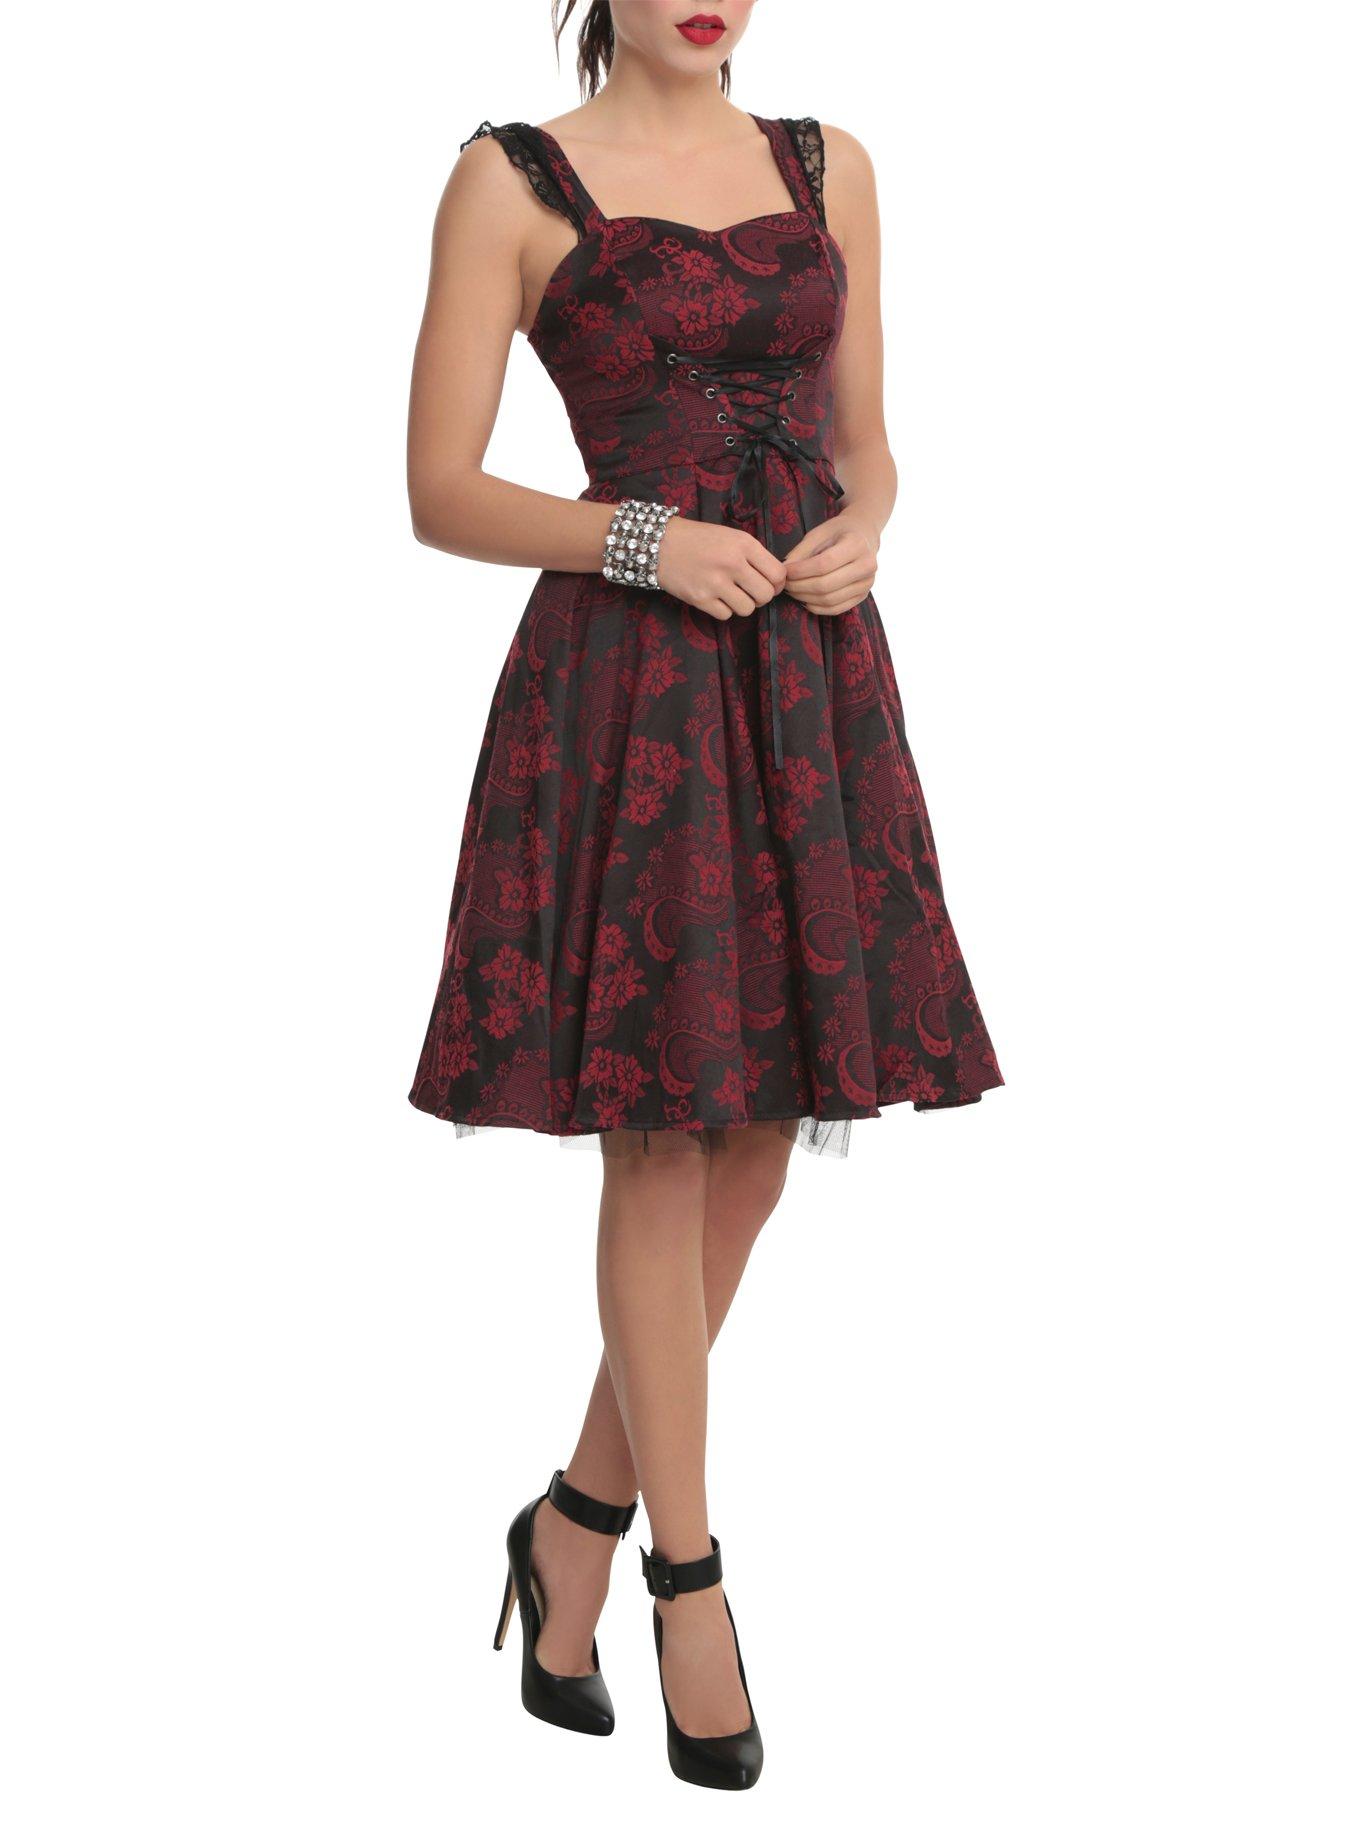 Red and Black Brocade Hot Topic